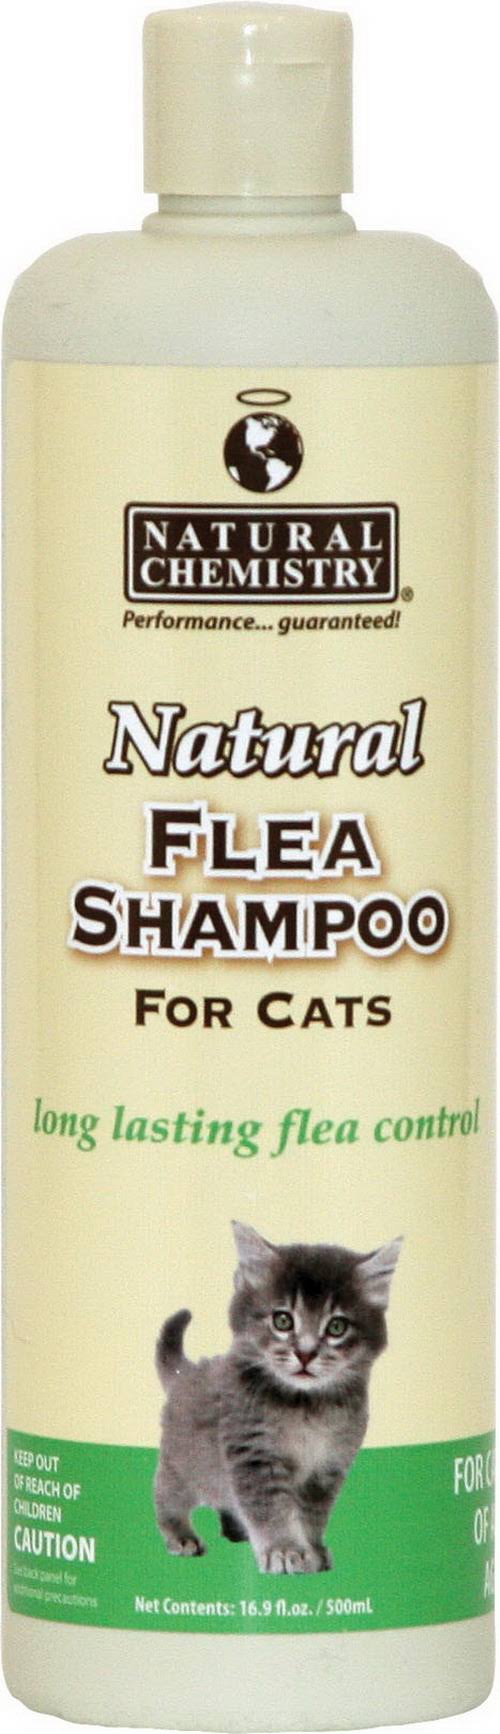 Natural Flea Shampoo For Cats and Kittens - 16.9oz